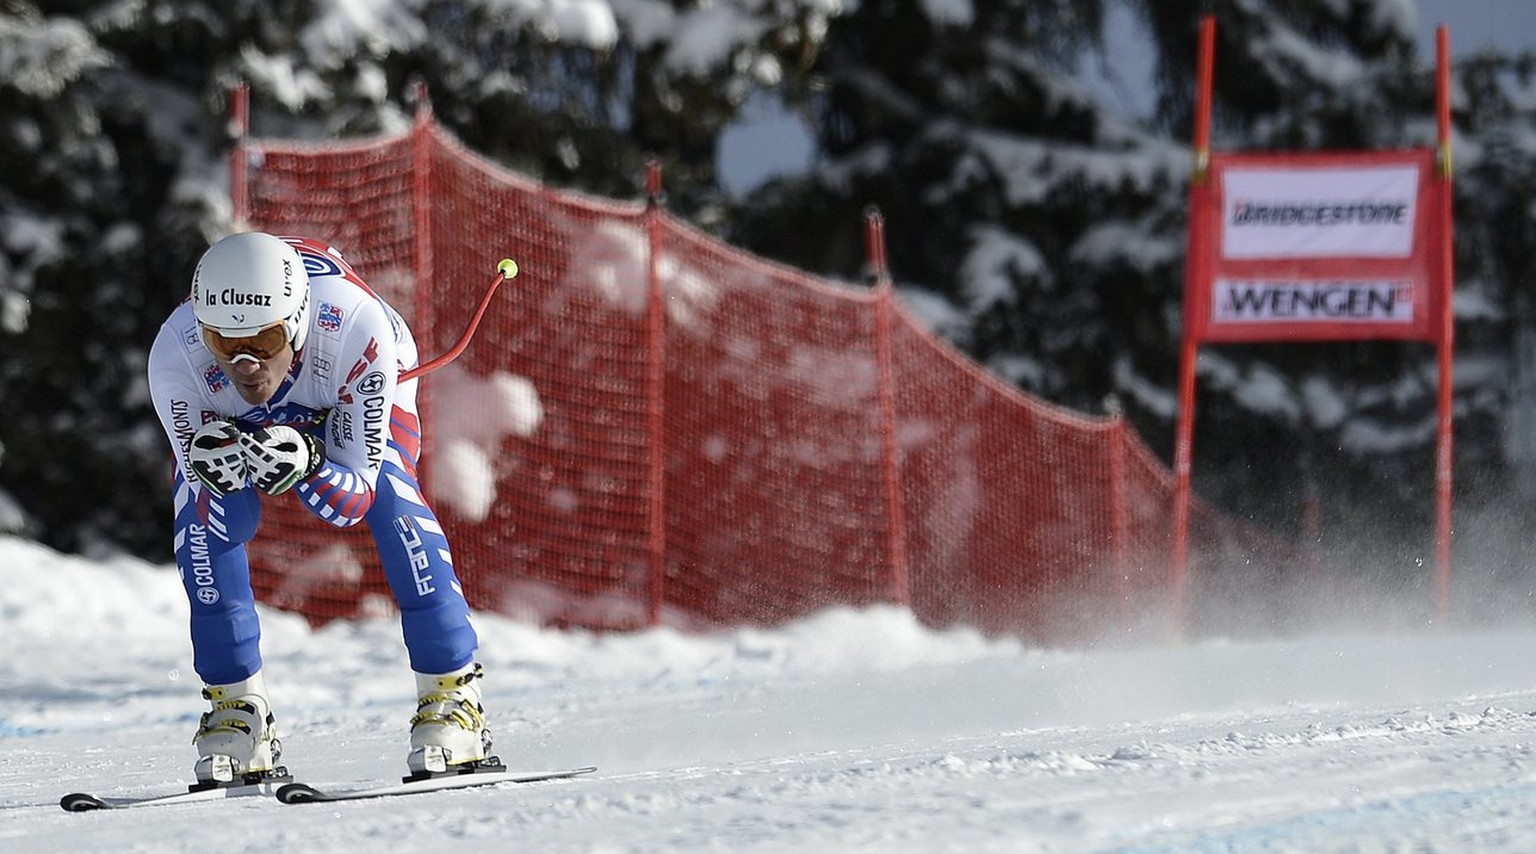 Johan Clarey of France in action during the second downhill training at the FIS Ski World Cup at the Lauberhorn in Wengen, Switzerland, Wednesday, January 16, 2013. (KEYSTONE/Peter Schneider)